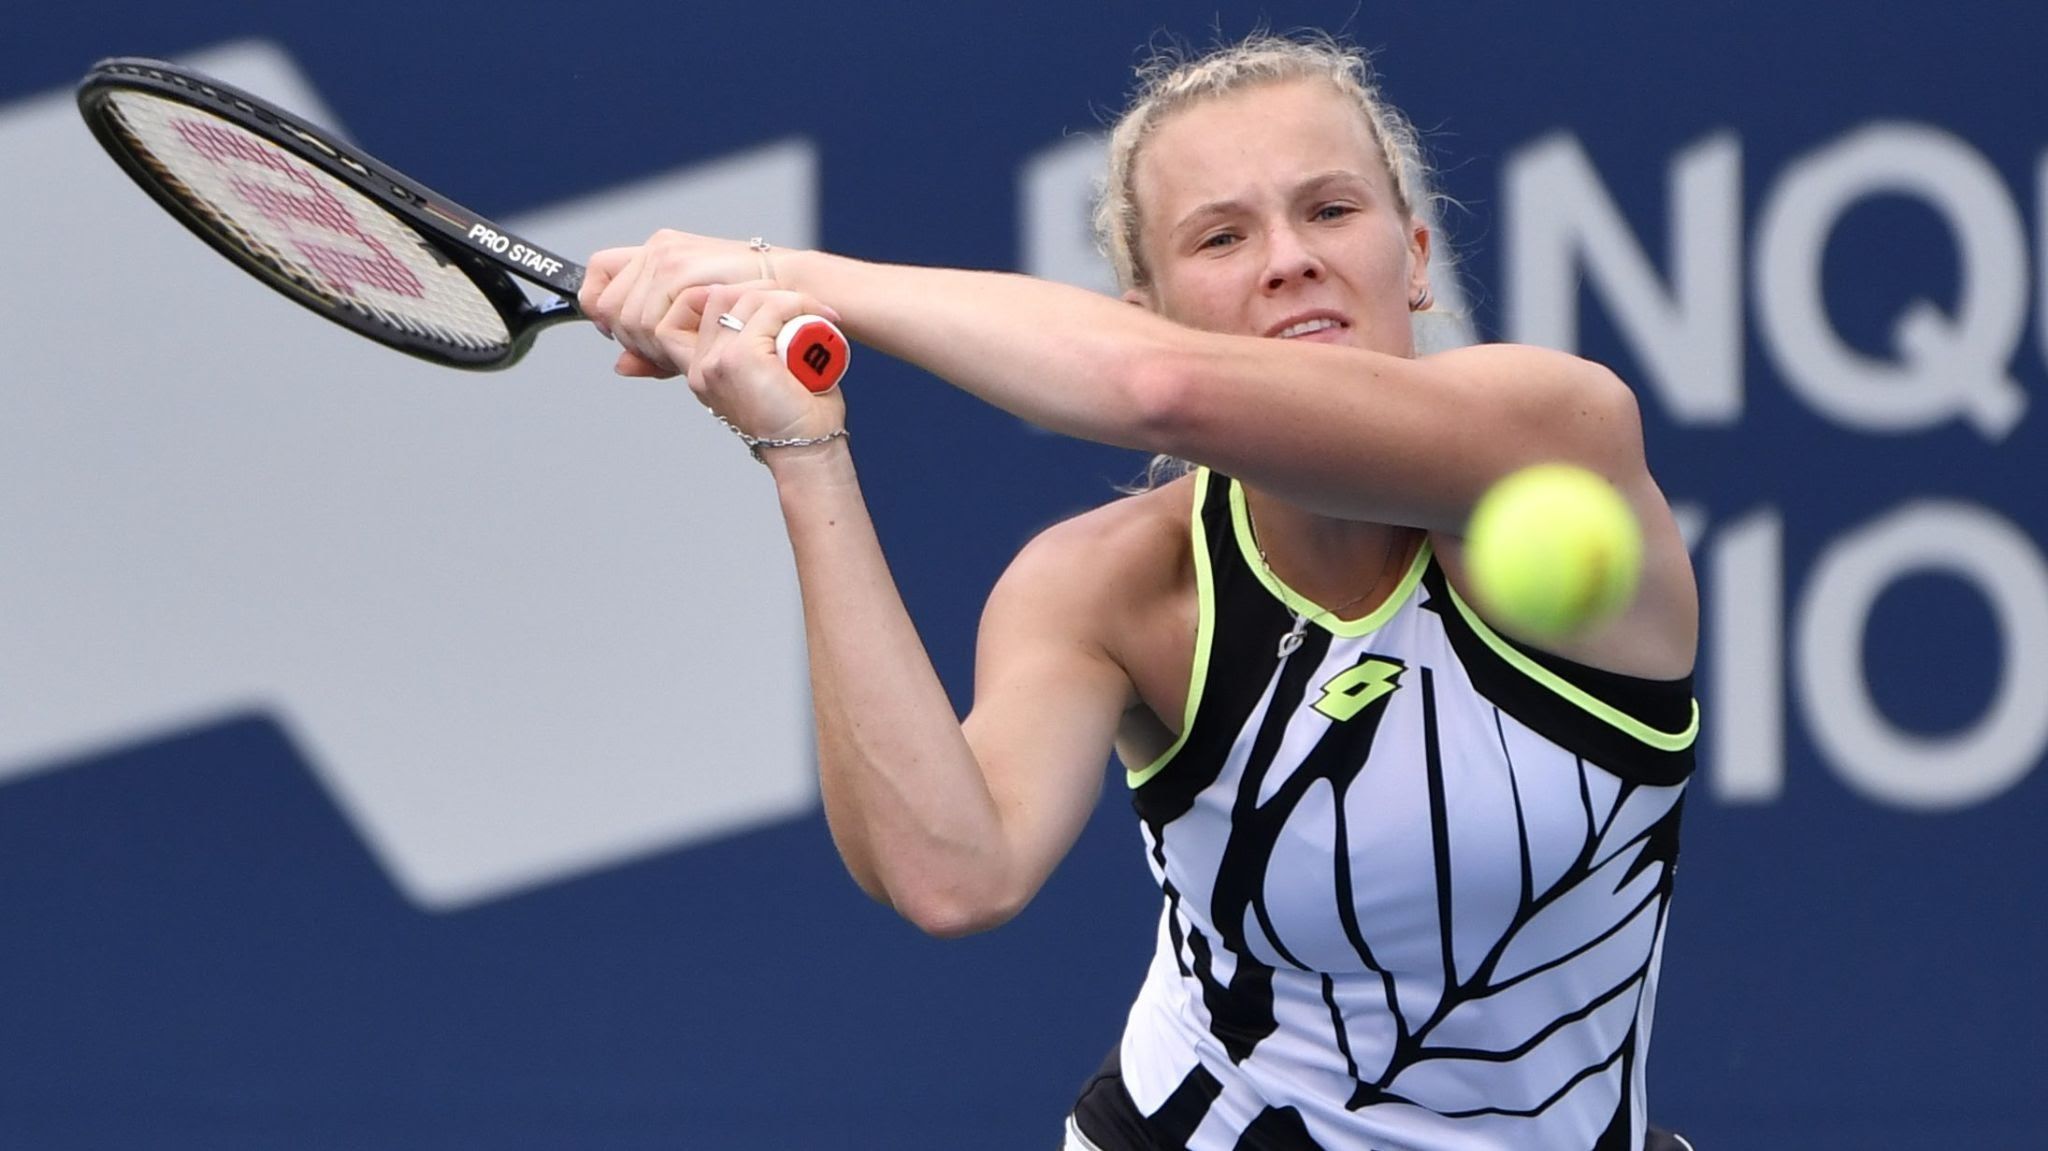 WTA BNP: Clijsters loses in three sets on comeback versus Katerina